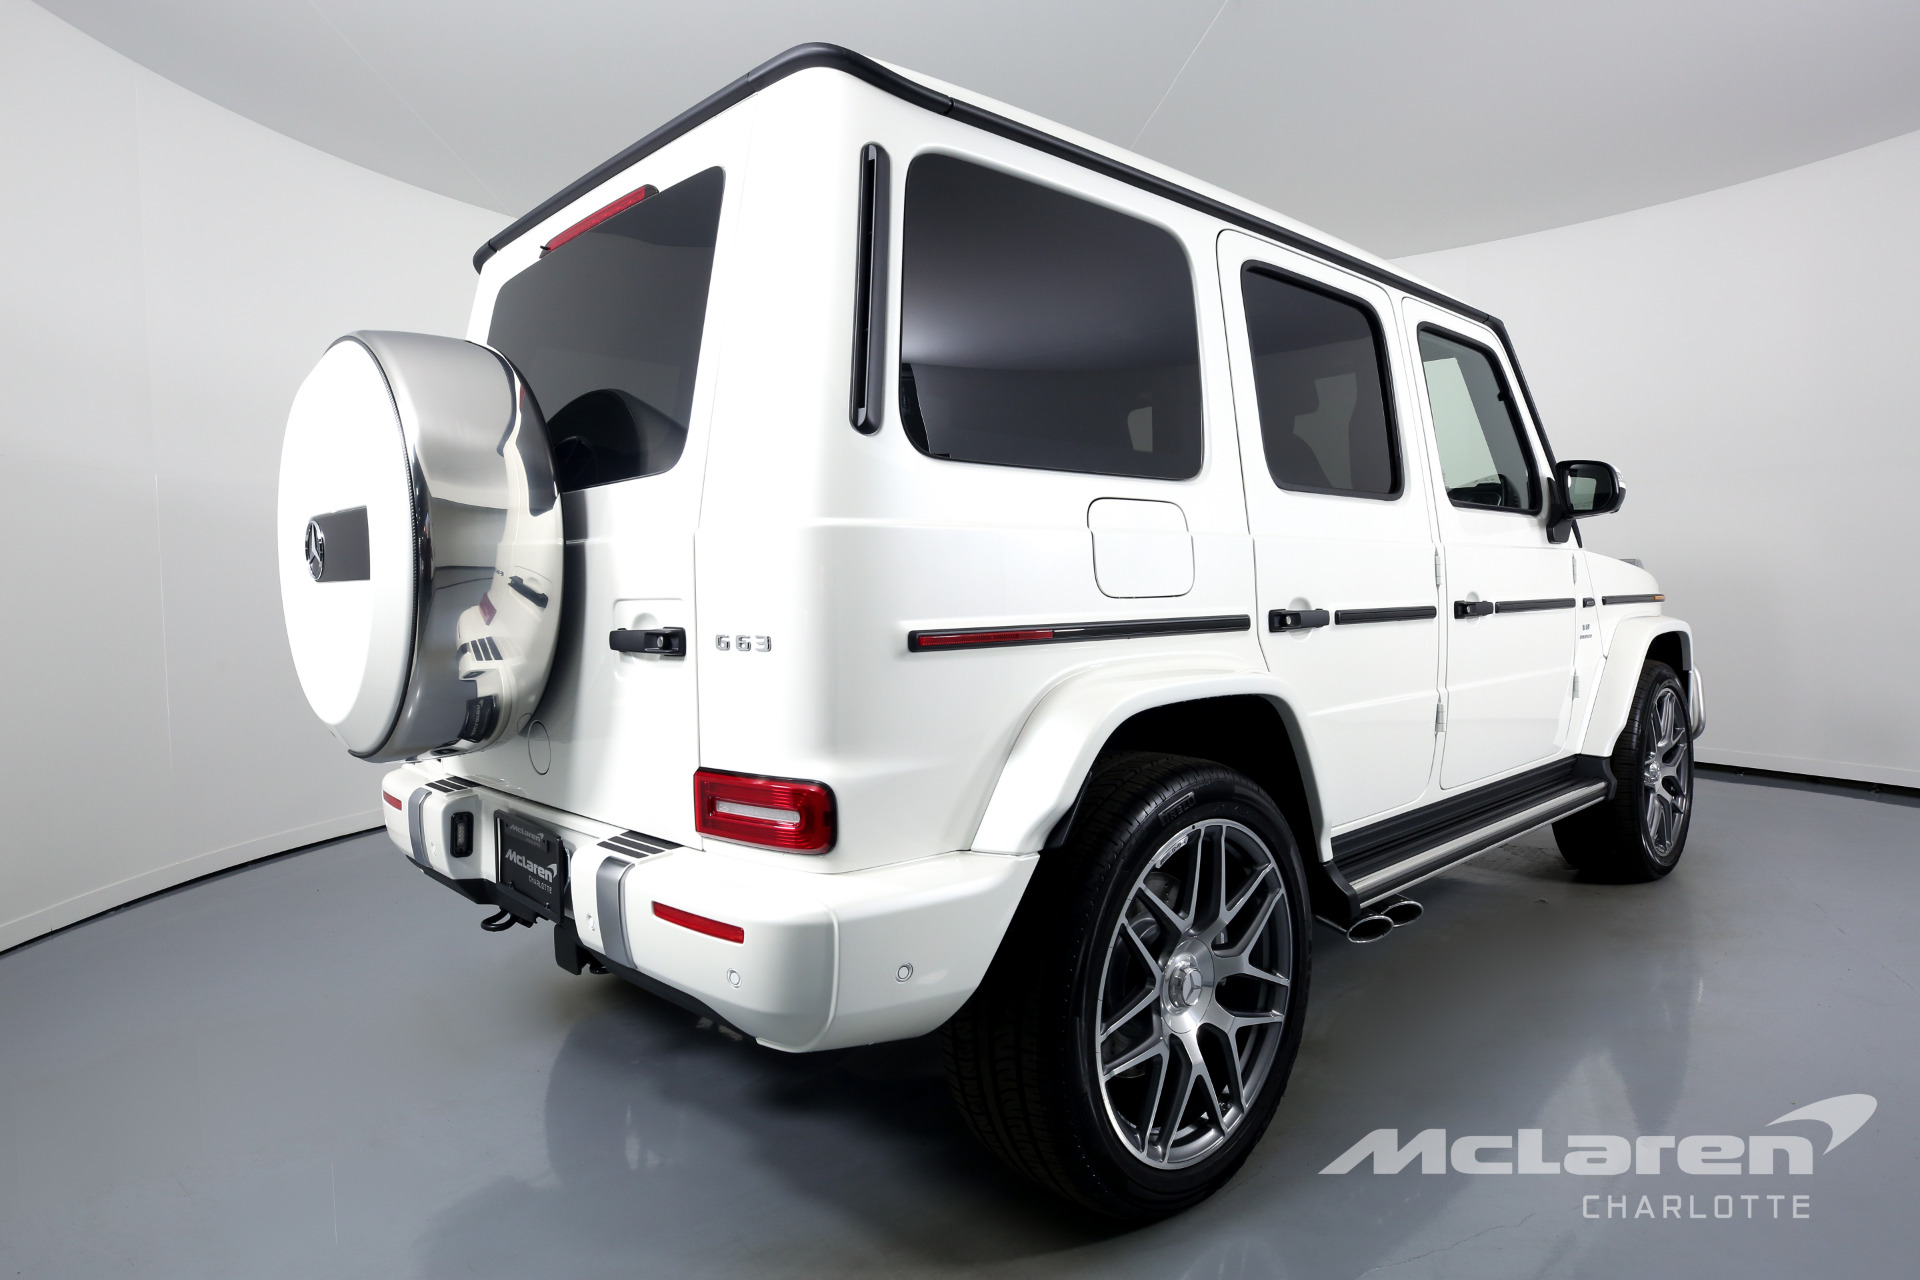 Used 21 Mercedes Benz G Class Amg G 63 For Sale 279 996 Mclaren Charlotte Stock 3771